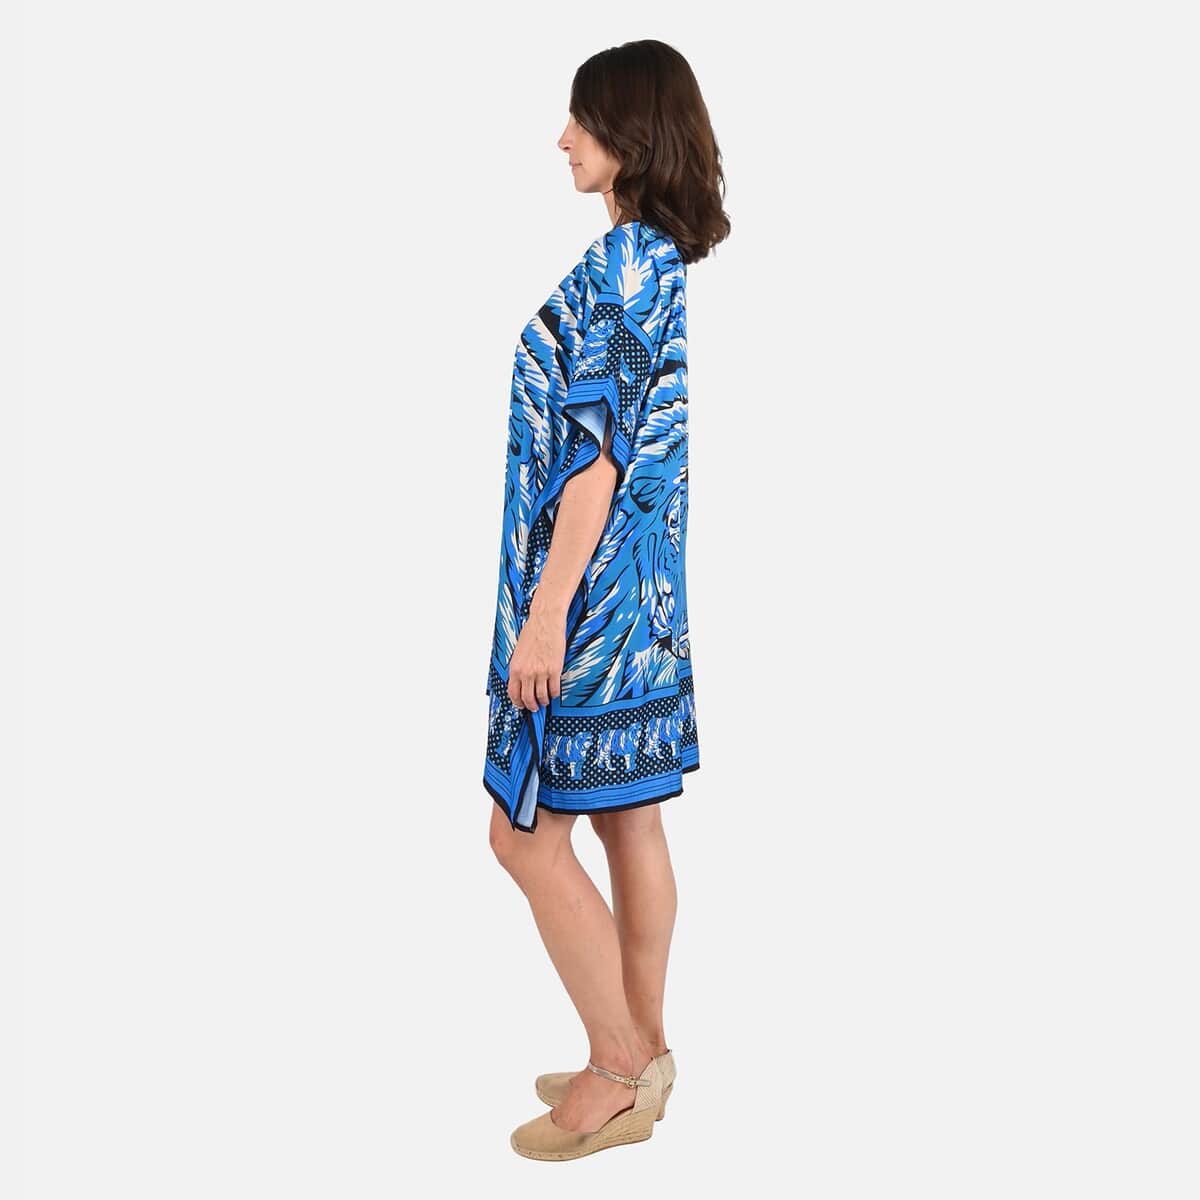 TAMSY Blue Tiger Screen Printed Mid Short Kaftan - One Size Fits Most (36"x41") image number 2